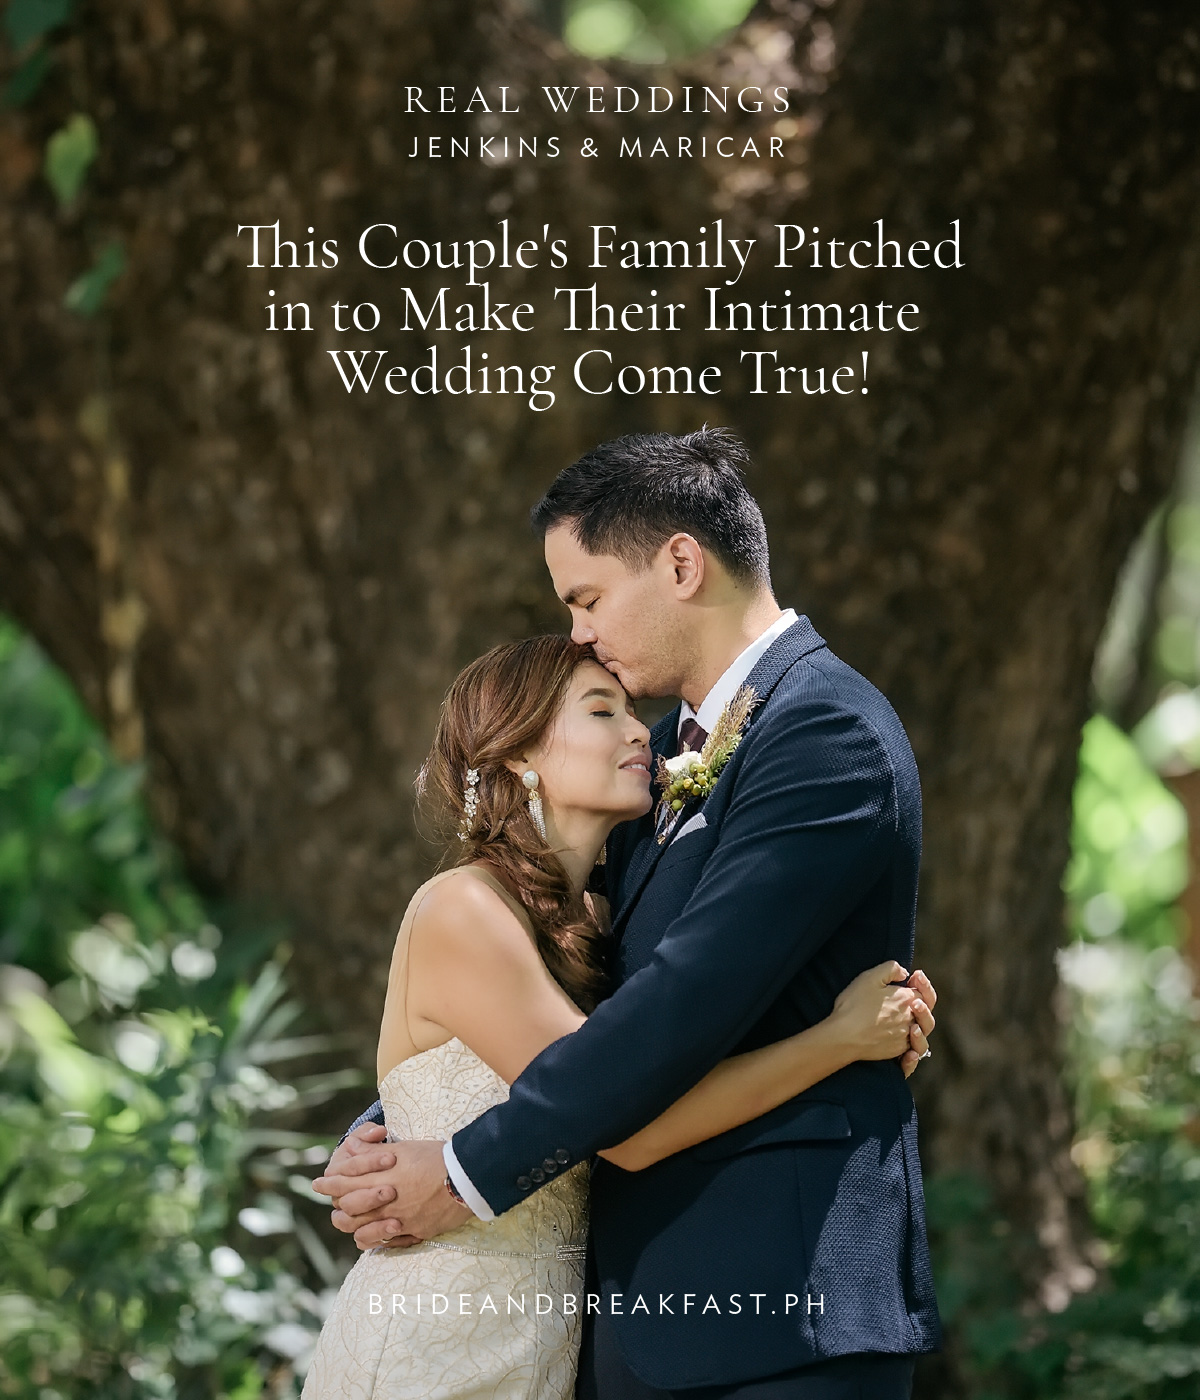 This Couple's Family Pitched in to Make Their Intimate Wedding Come True!